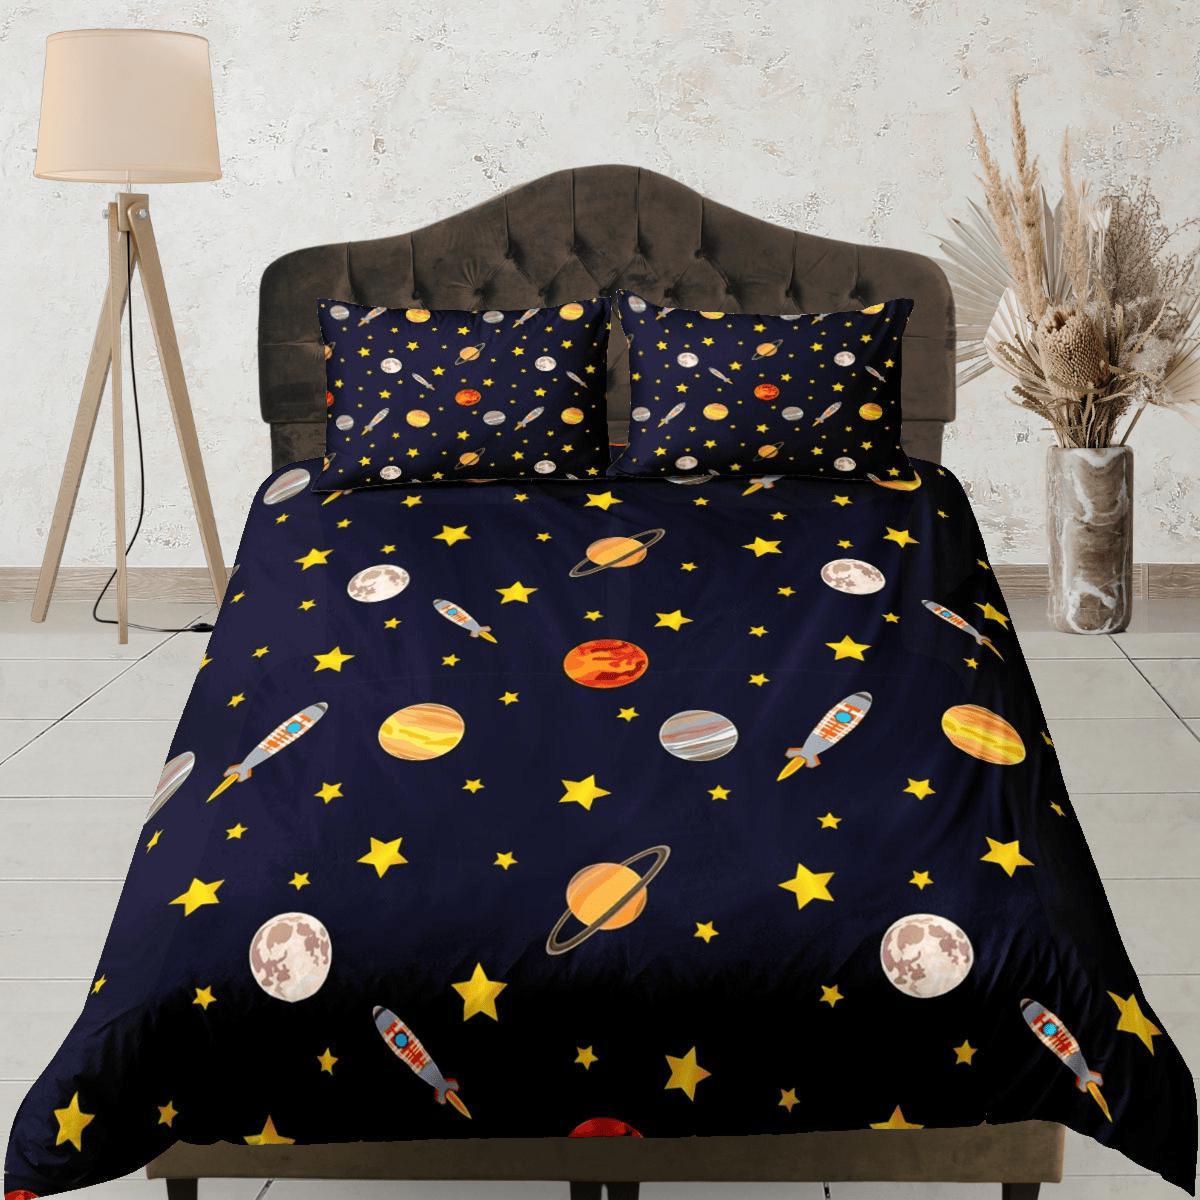 daintyduvet Planets Galaxy Duvet Cover Set Colorful Bedspread, Teens Kids Bedding & Pillowcase